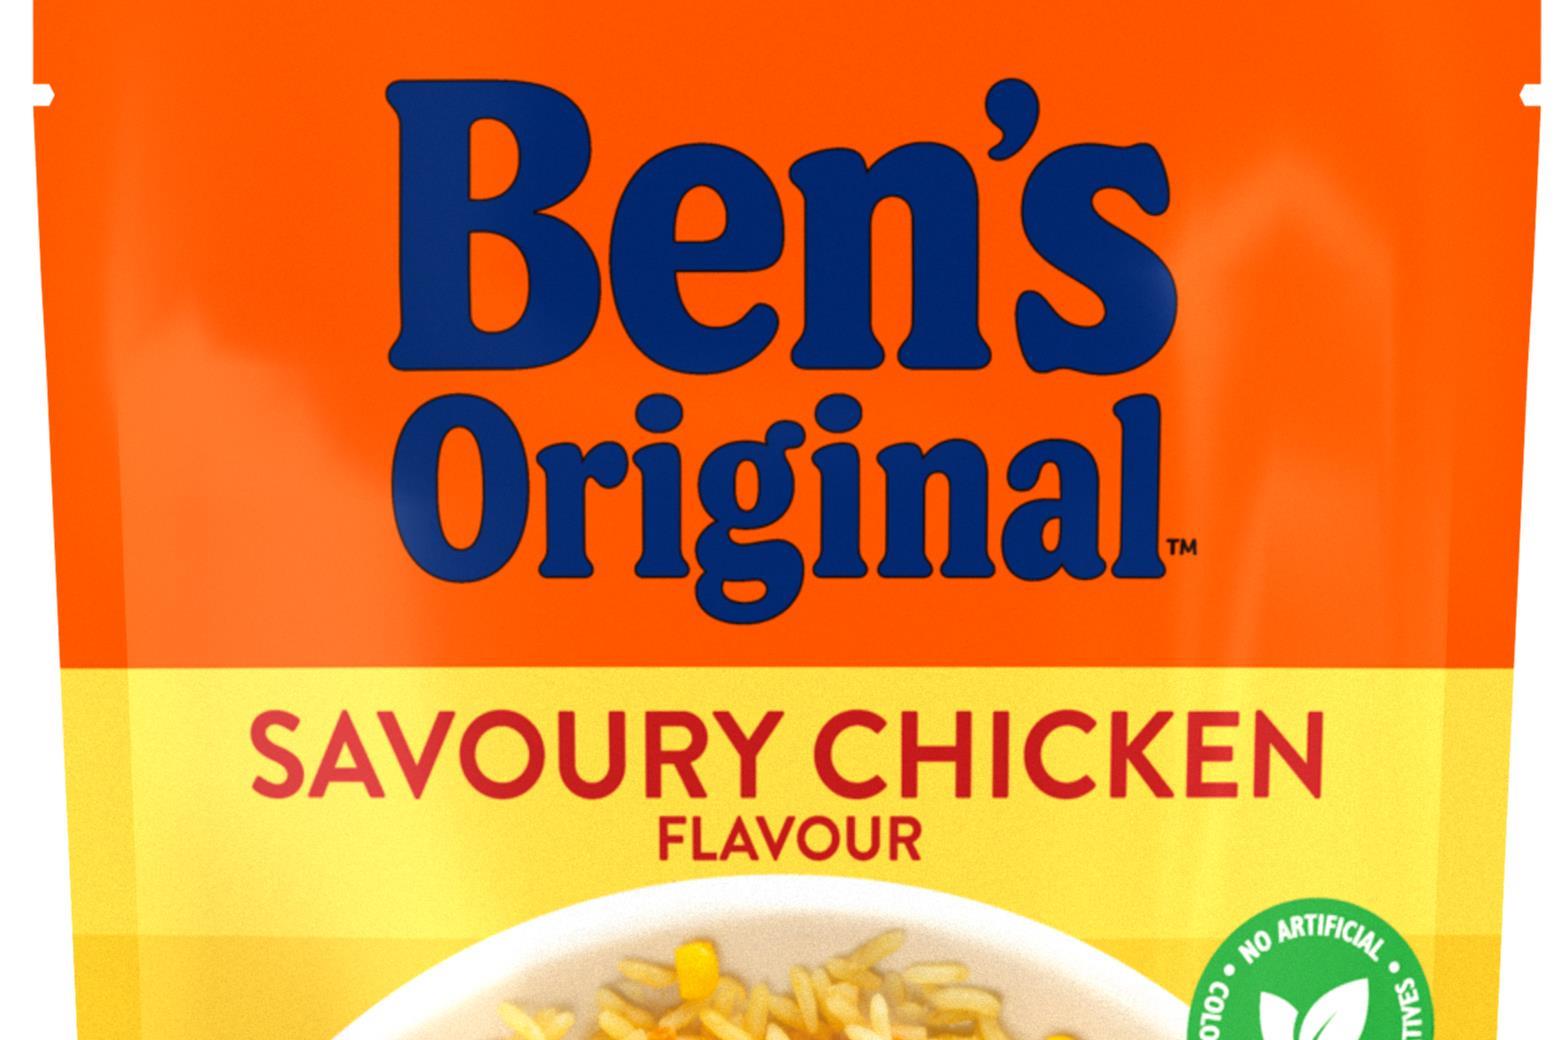 Uncle Ben's now has new name after image dropped by Mars; Here's when it  debuts 